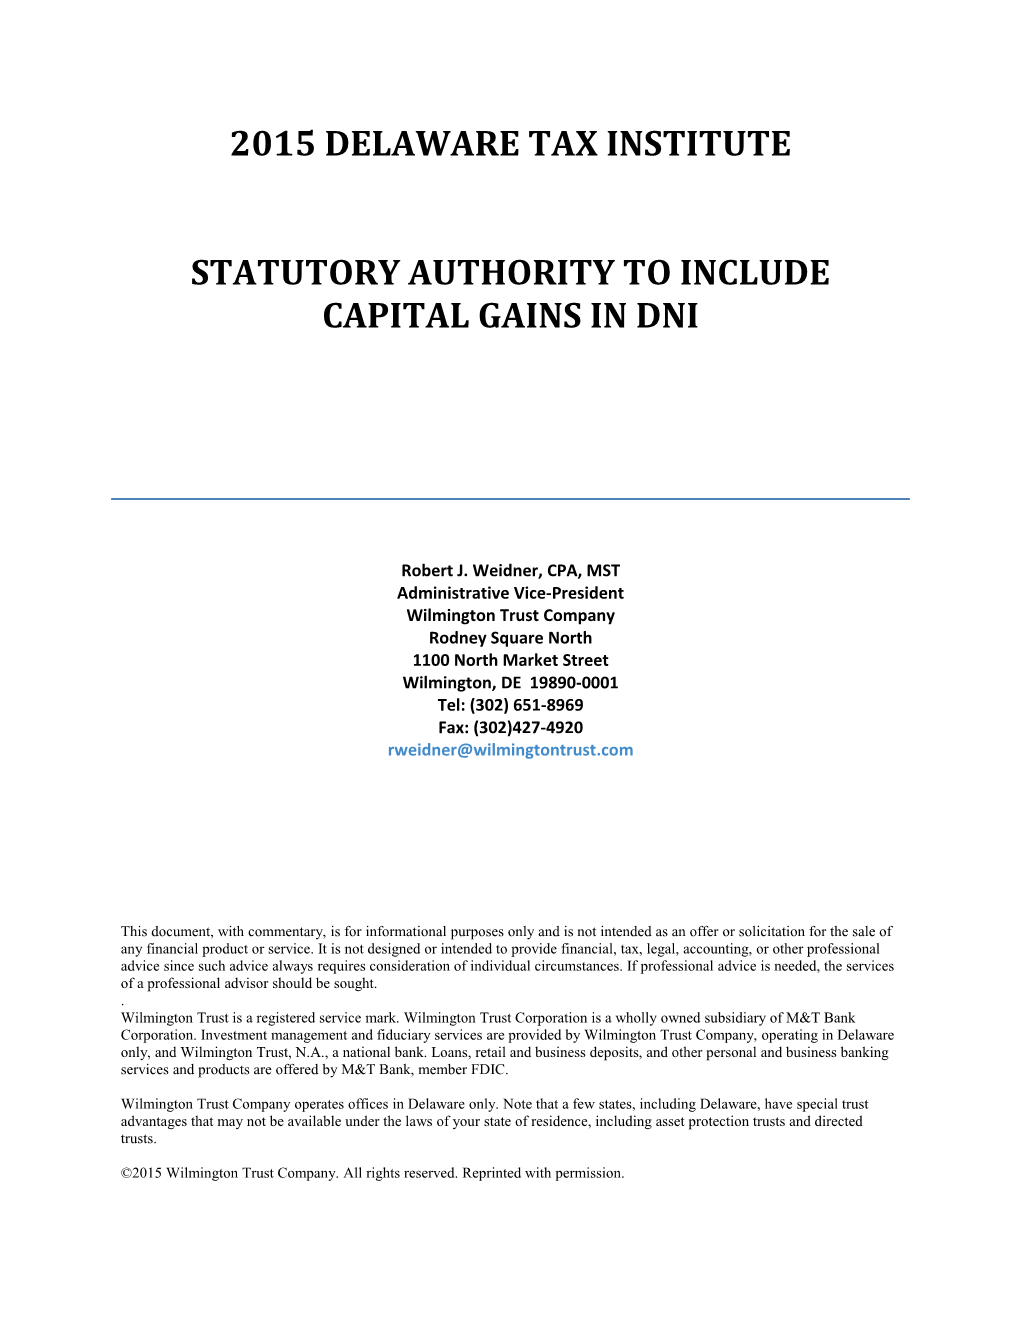 Statutory Authority to Include Capital Gains in Dni